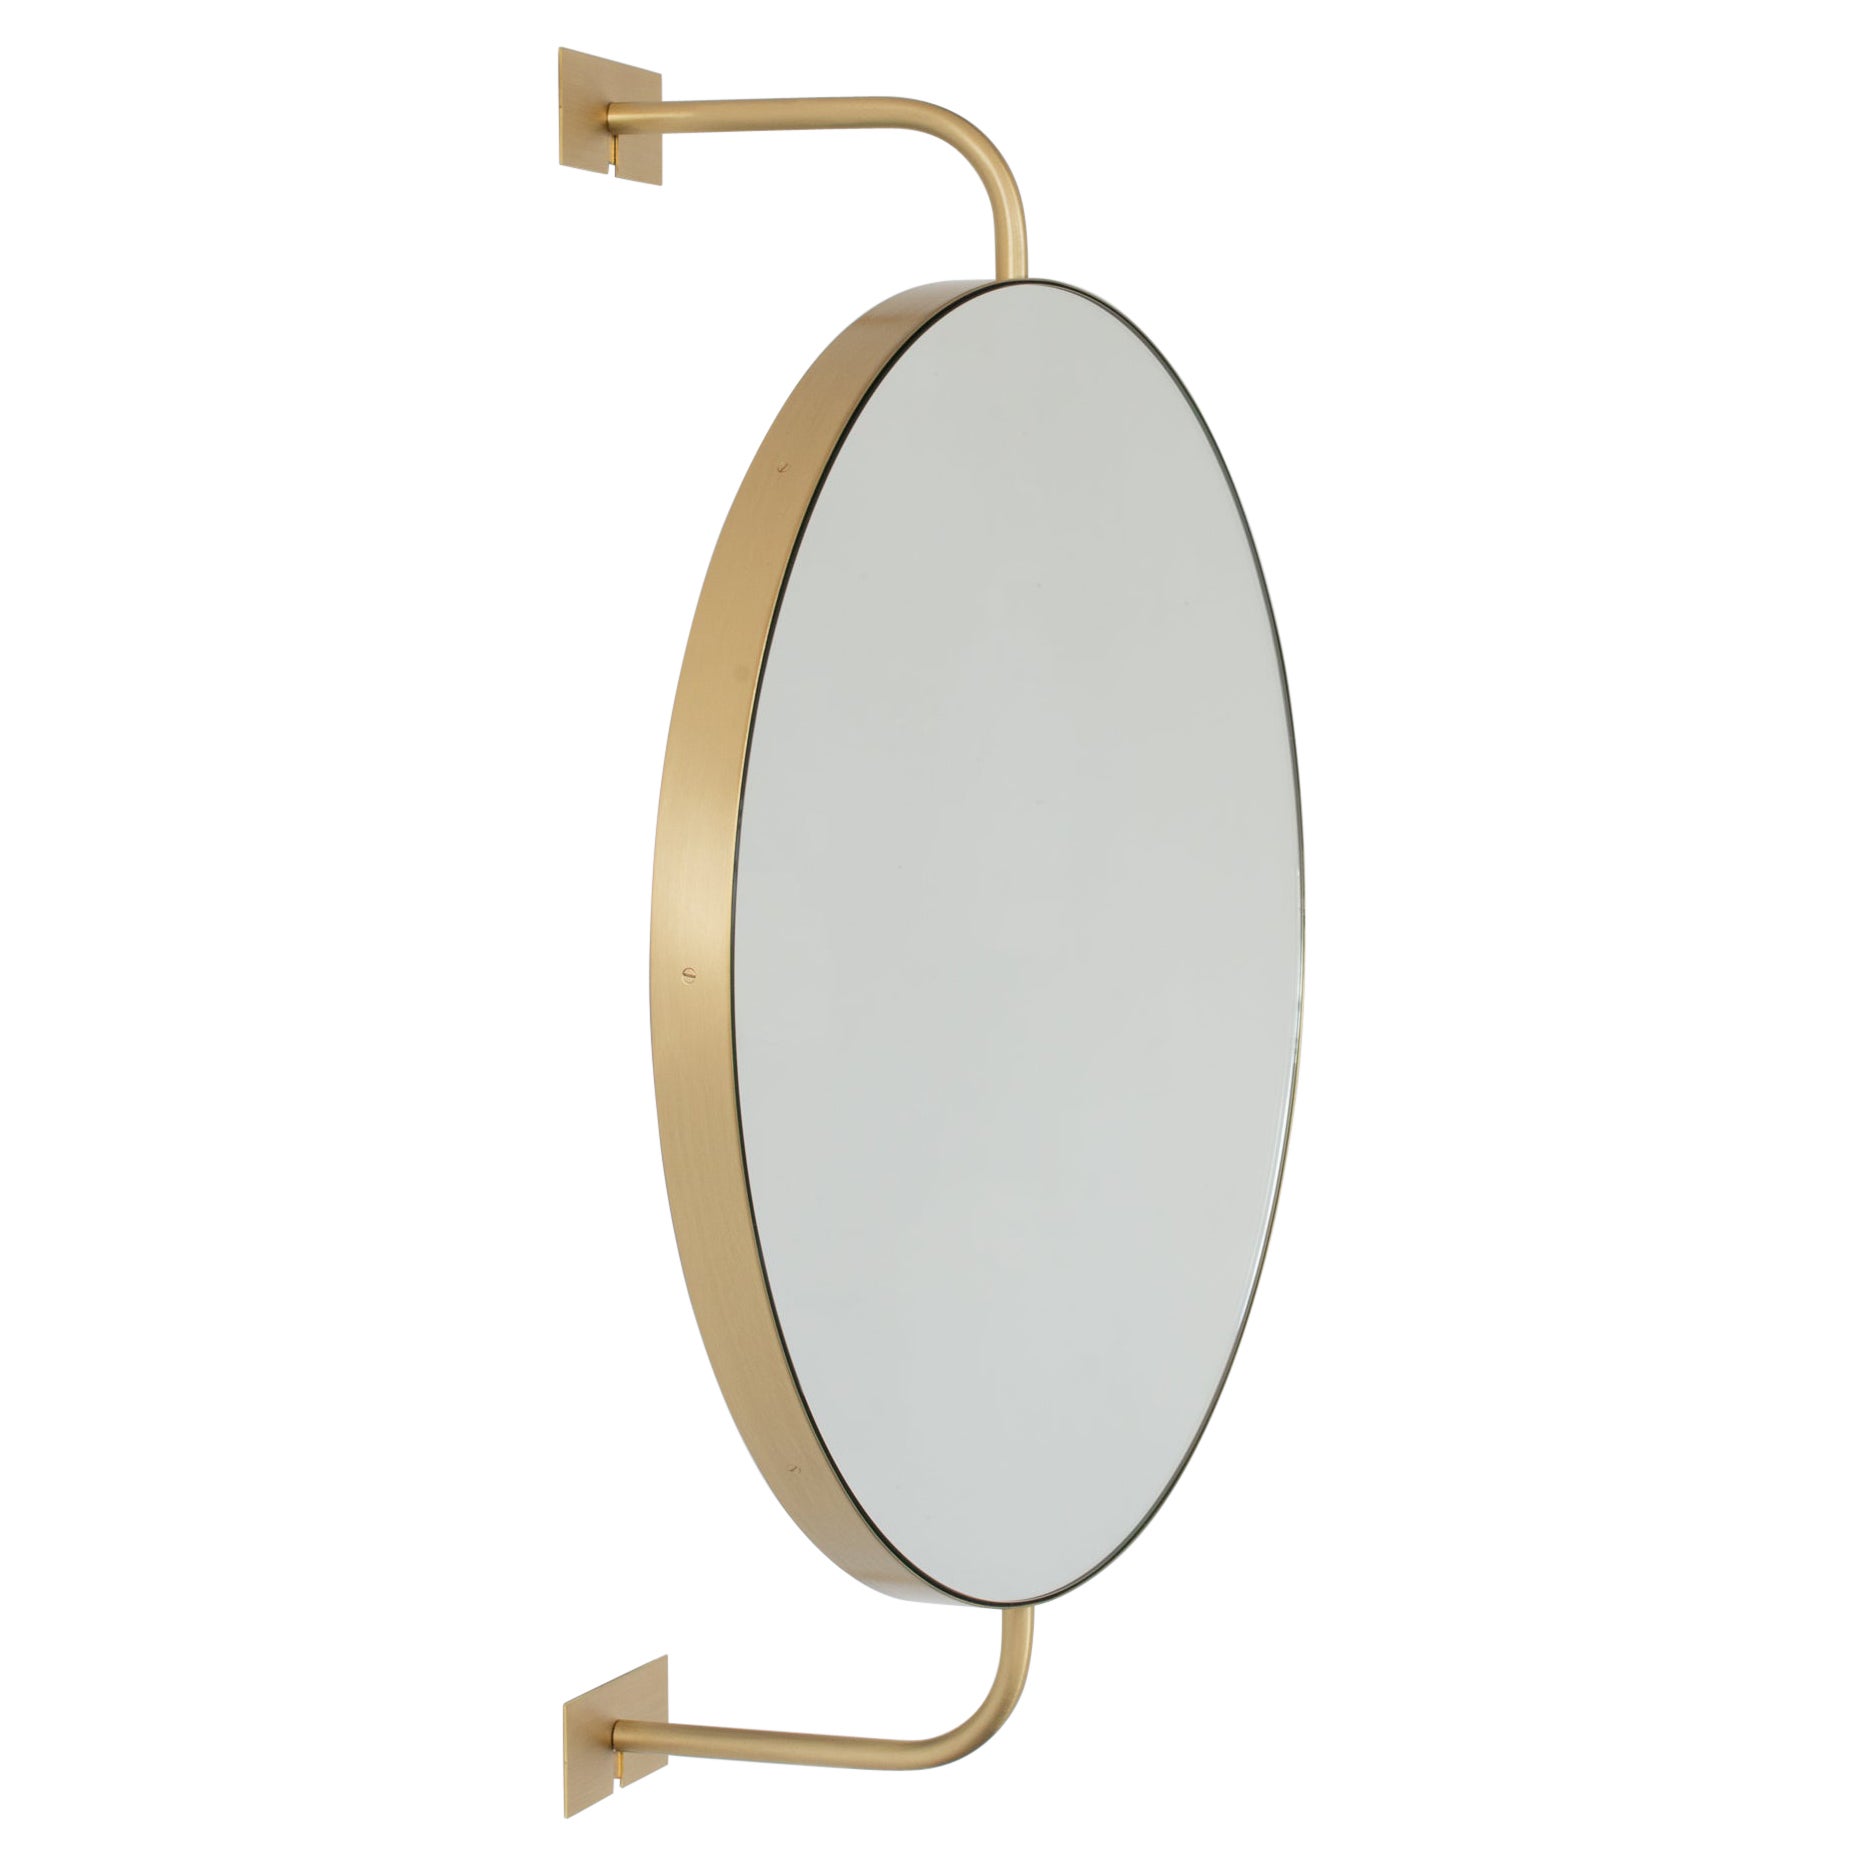 Vorso Wall Attached Suspended Rotating Round Mirror with Brushed Brass Frame For Sale